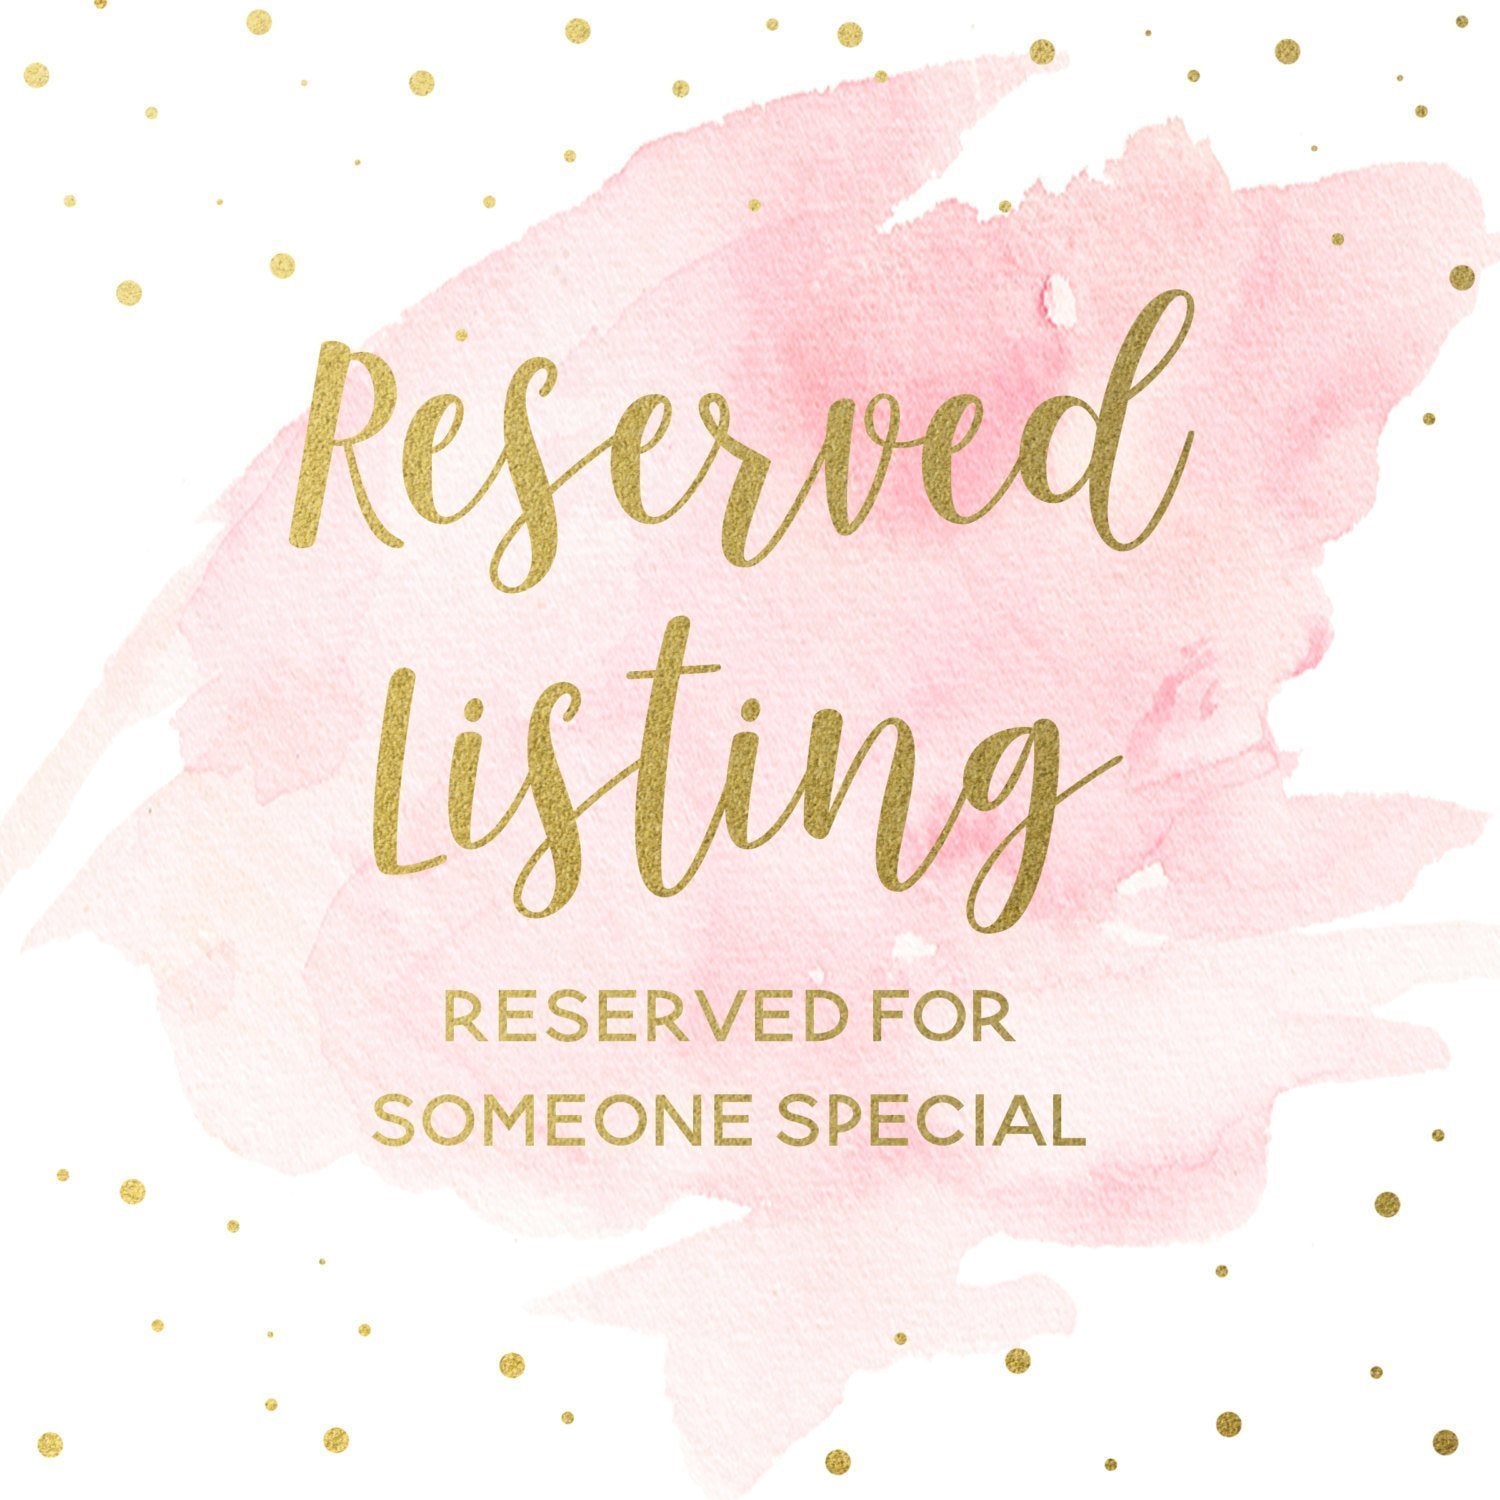 Reserved Listing - A Sprabary